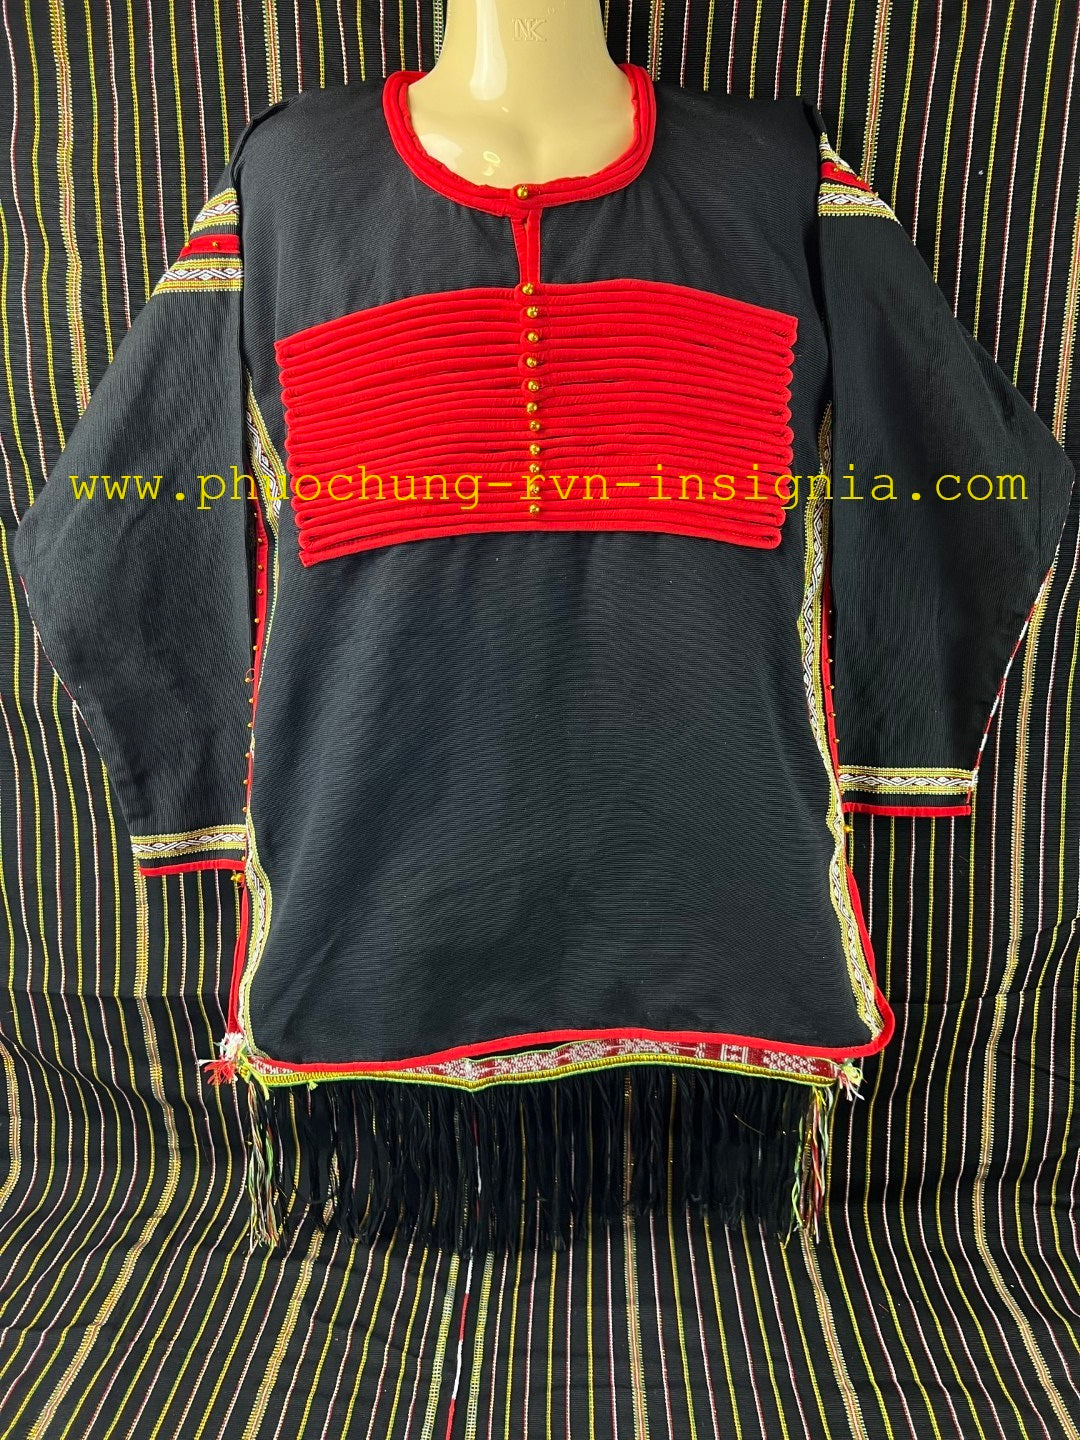 ARVN AATTV US 5th Special Forces Advisor Luc-Luong Dac-Biet Tribal Montagnard Robe / Shirt